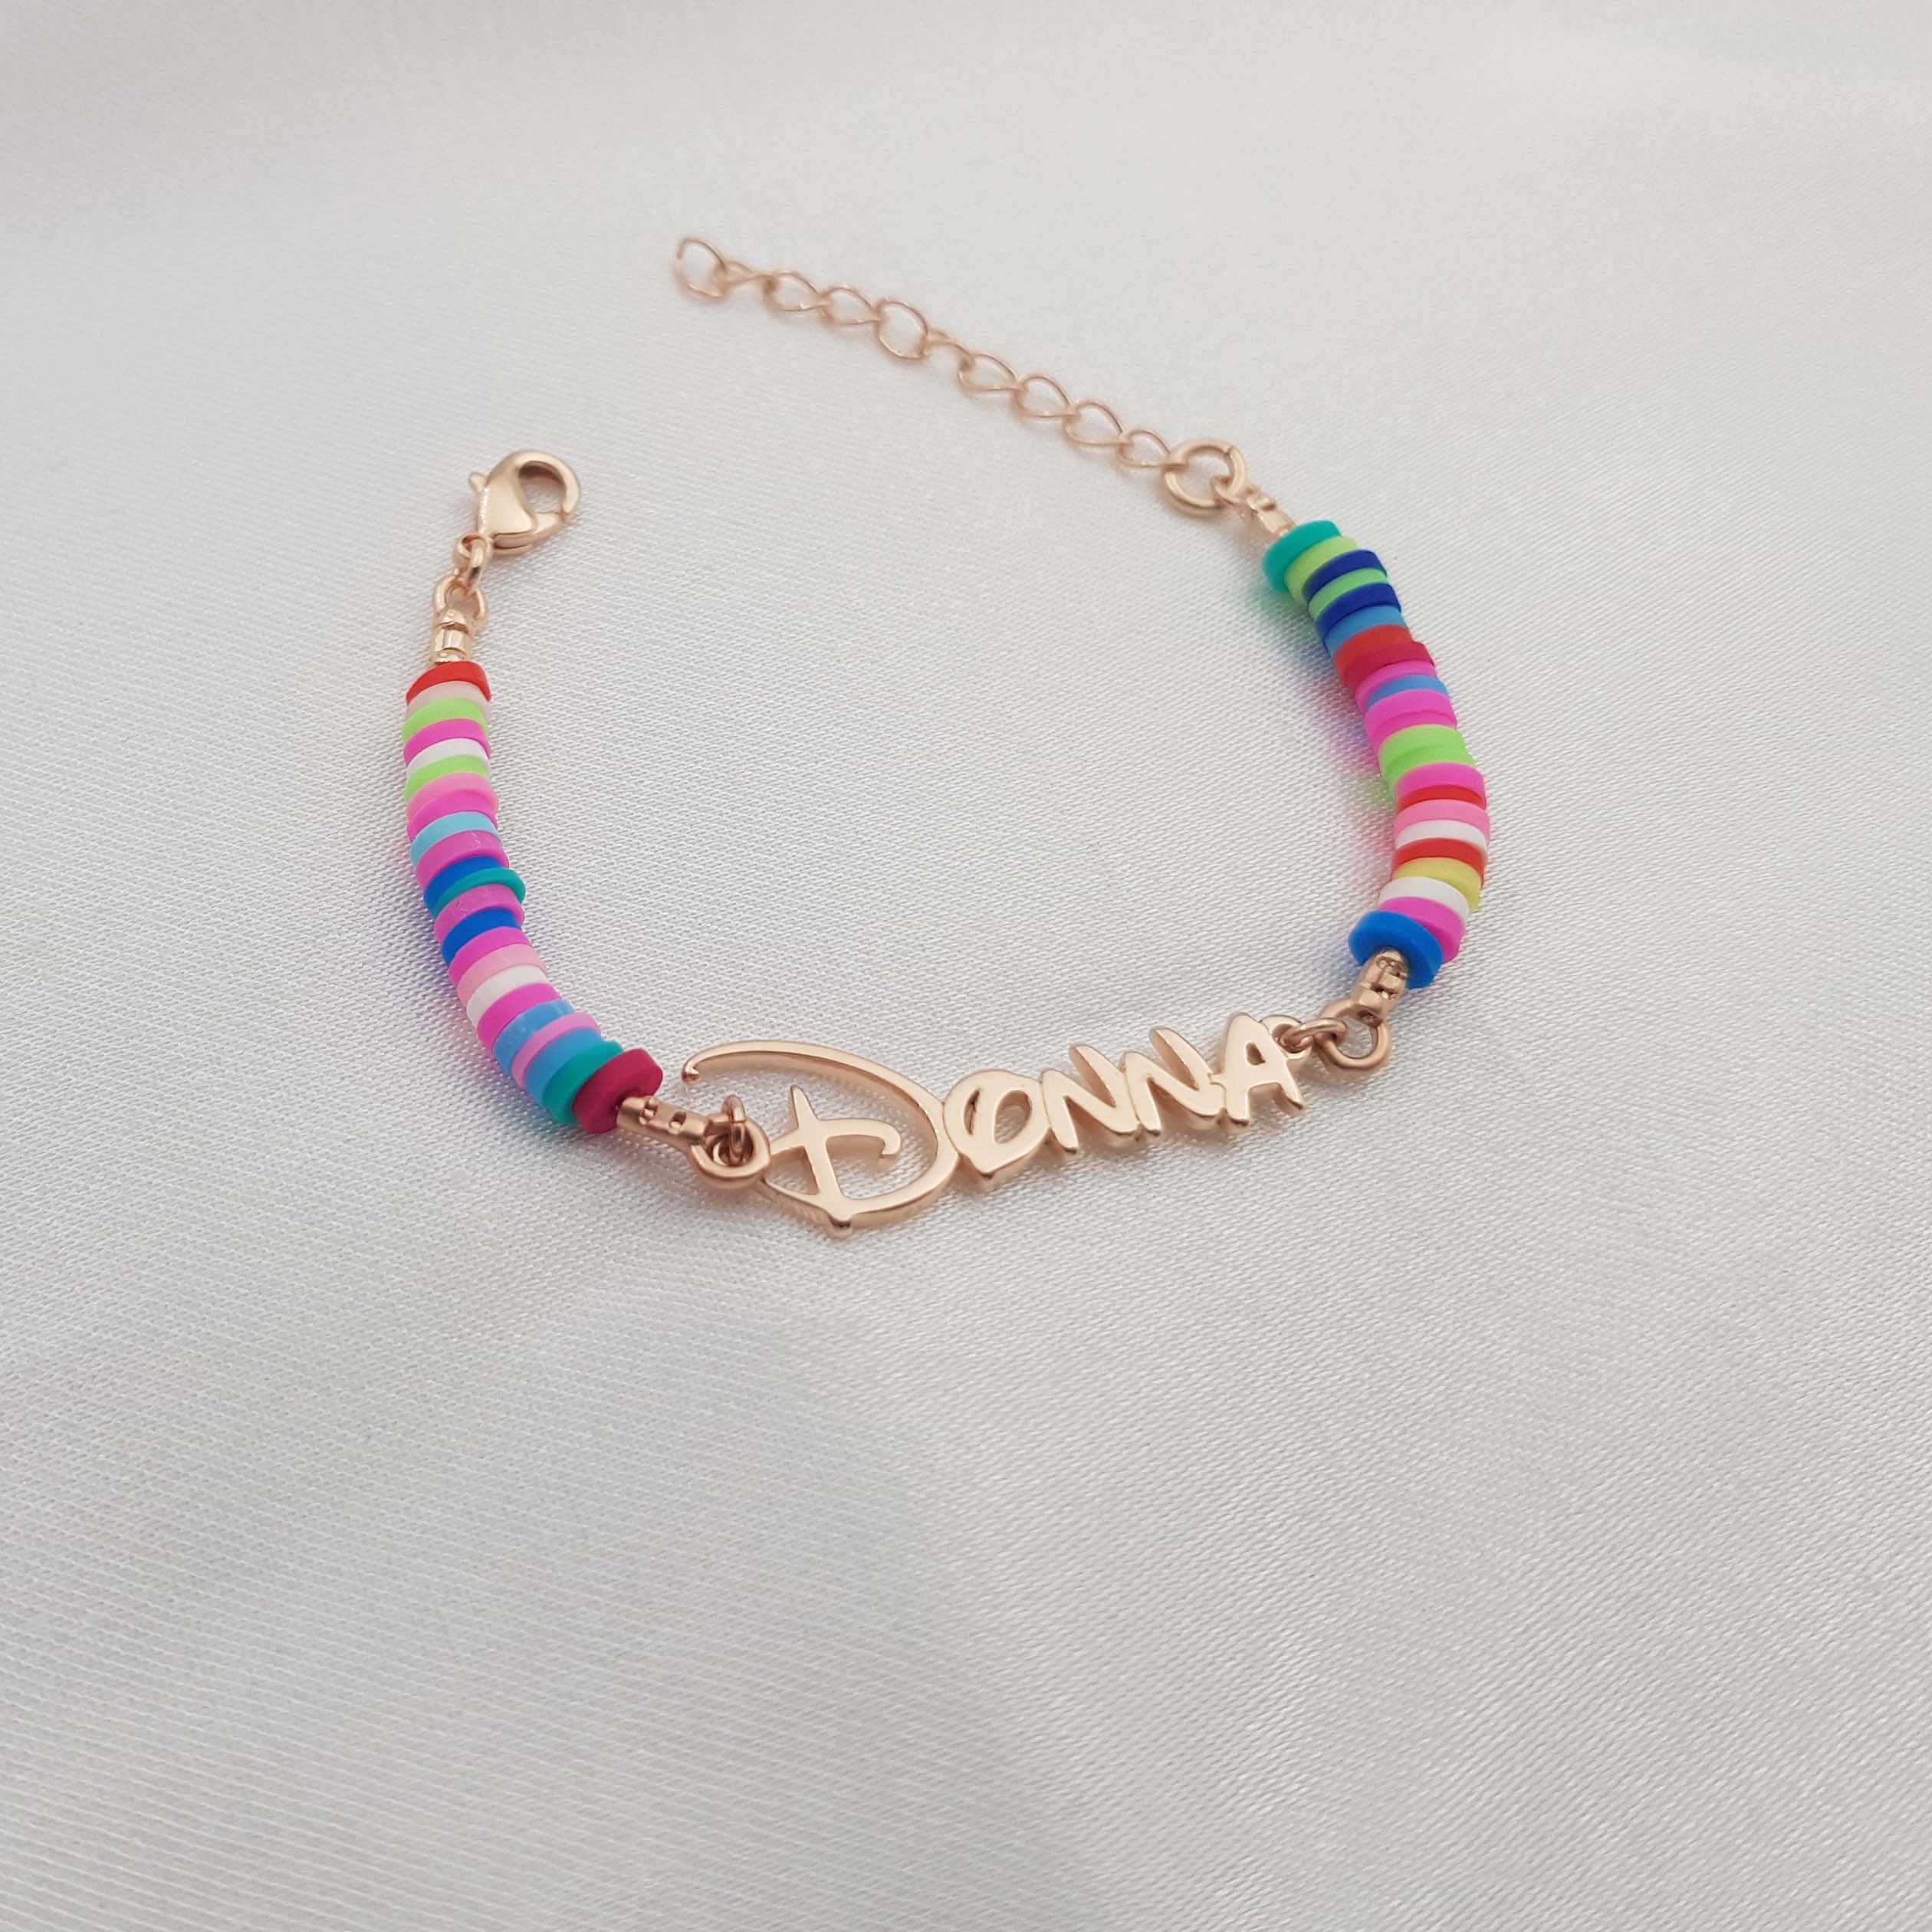 Customized Children's Name Colored Clay Bracelet